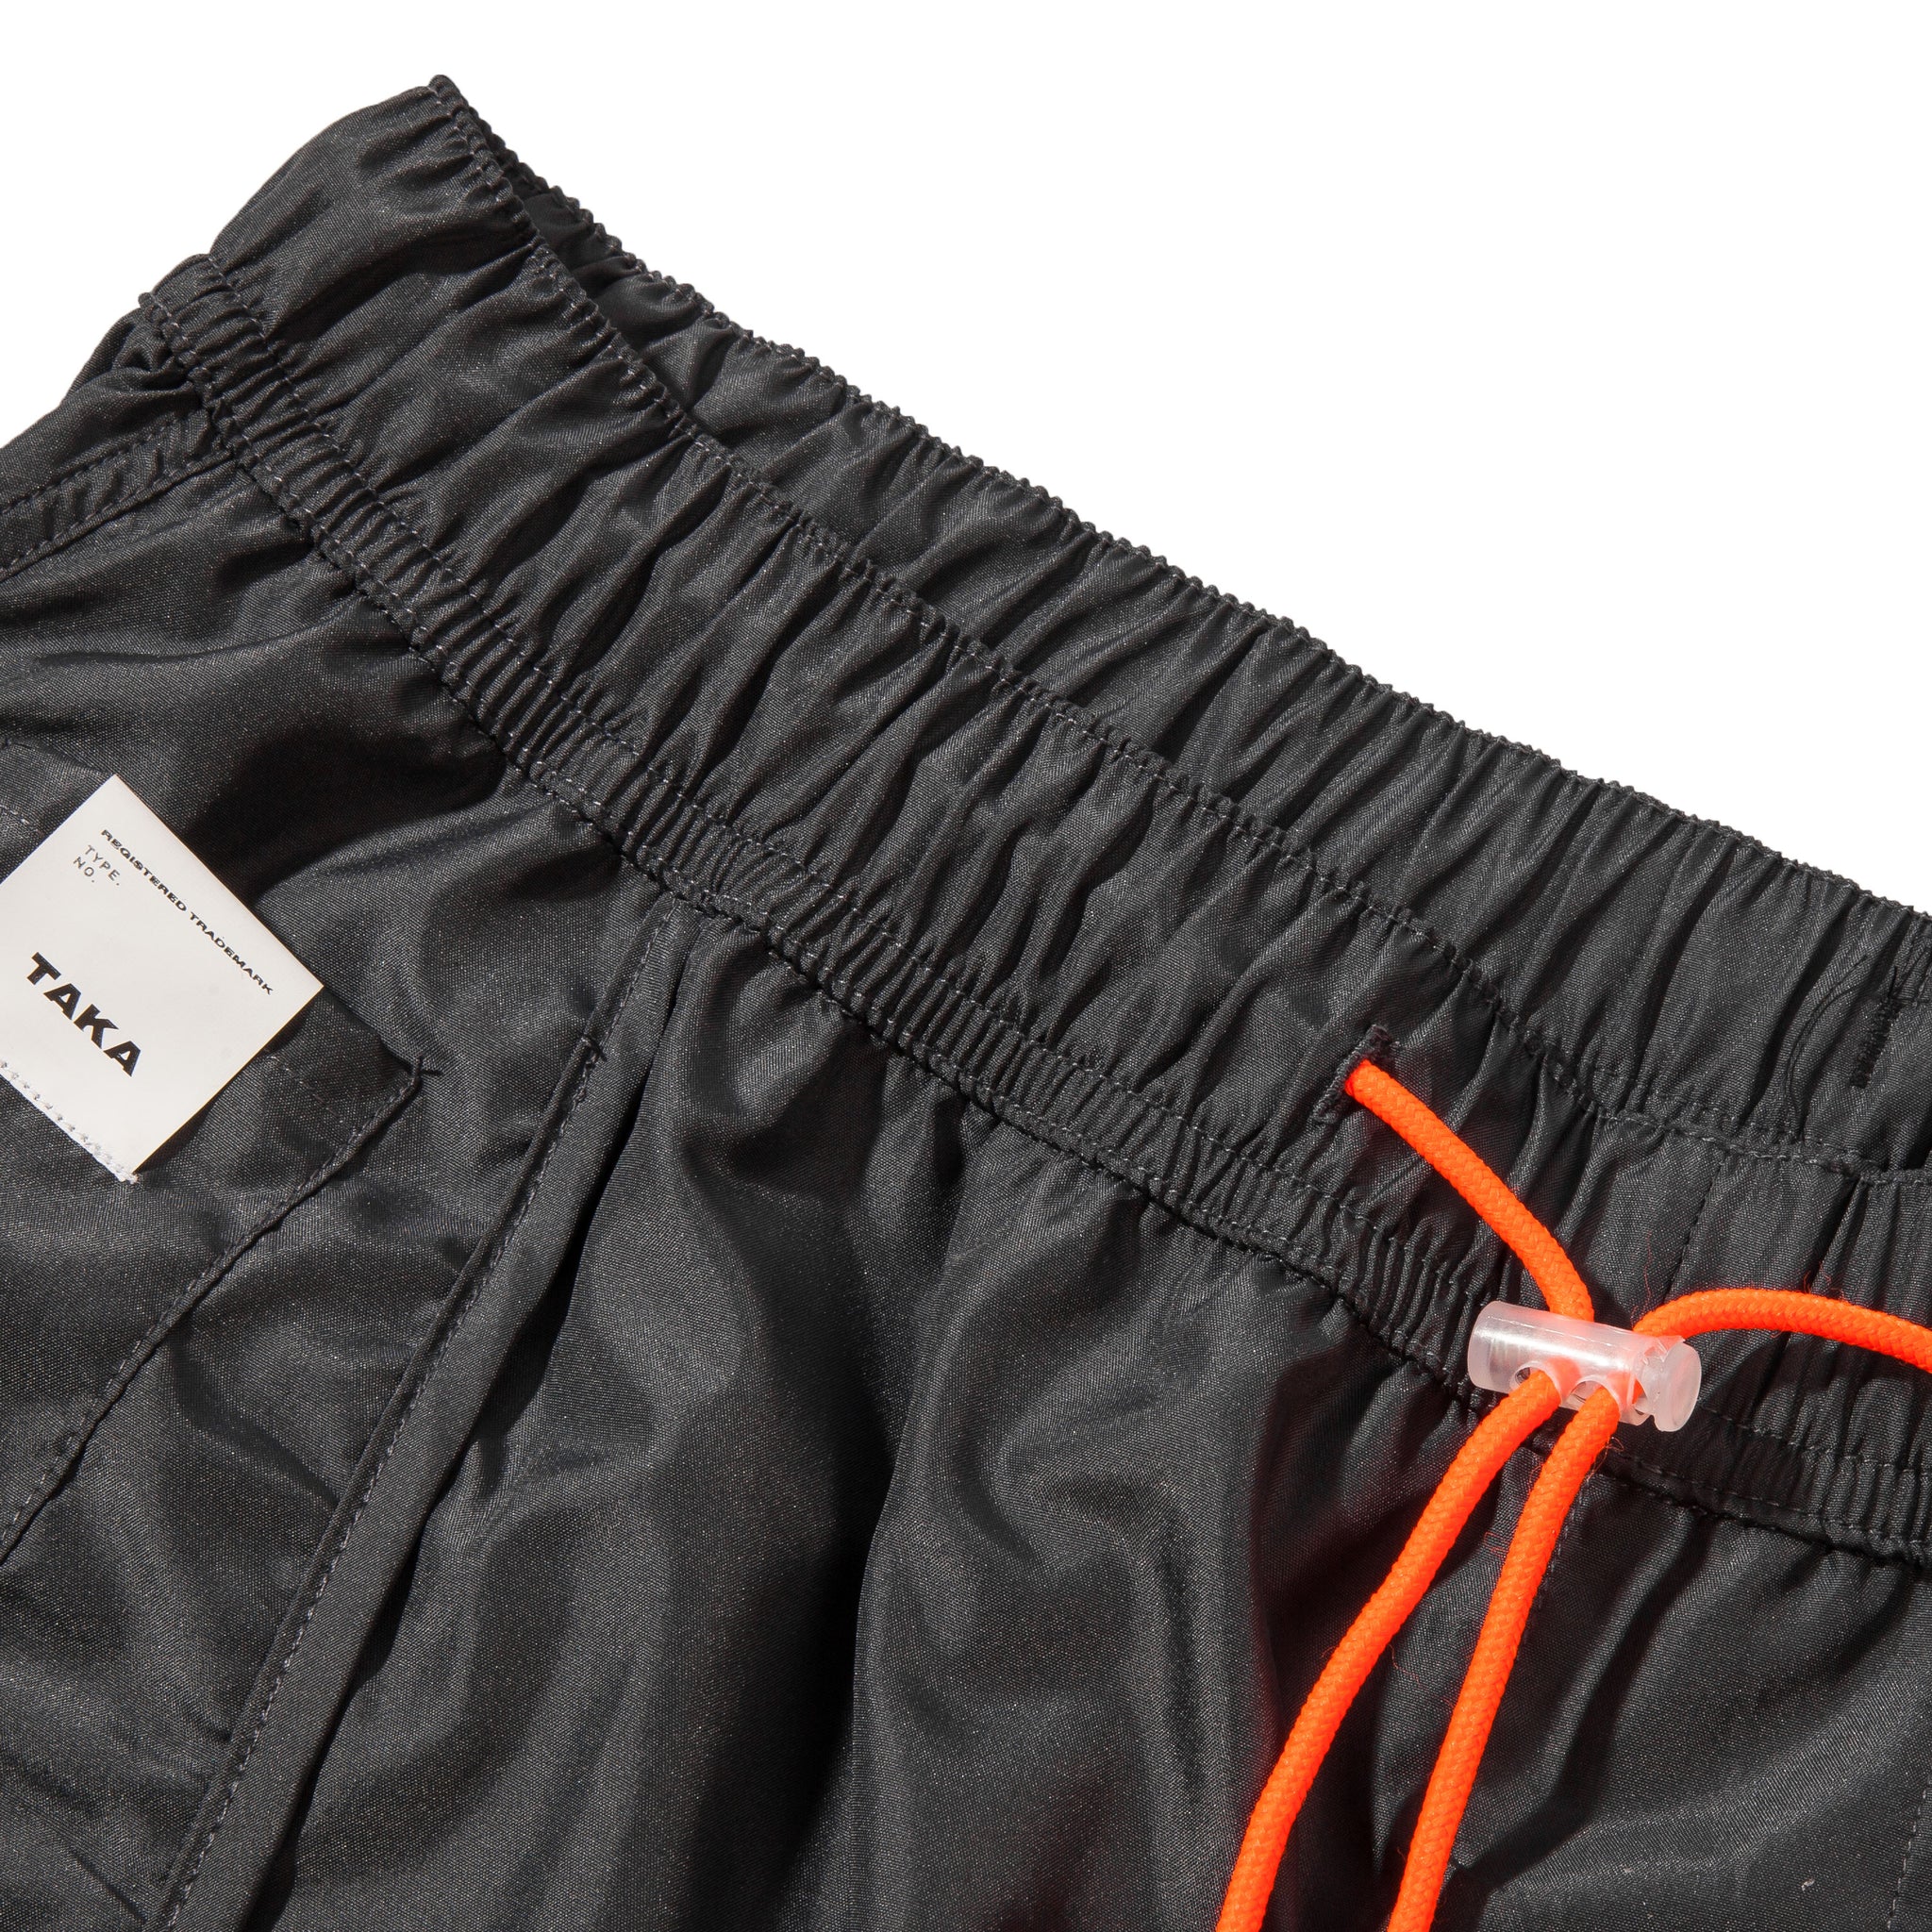 Buggy Nylon Shorts Pro Luxe Carbon